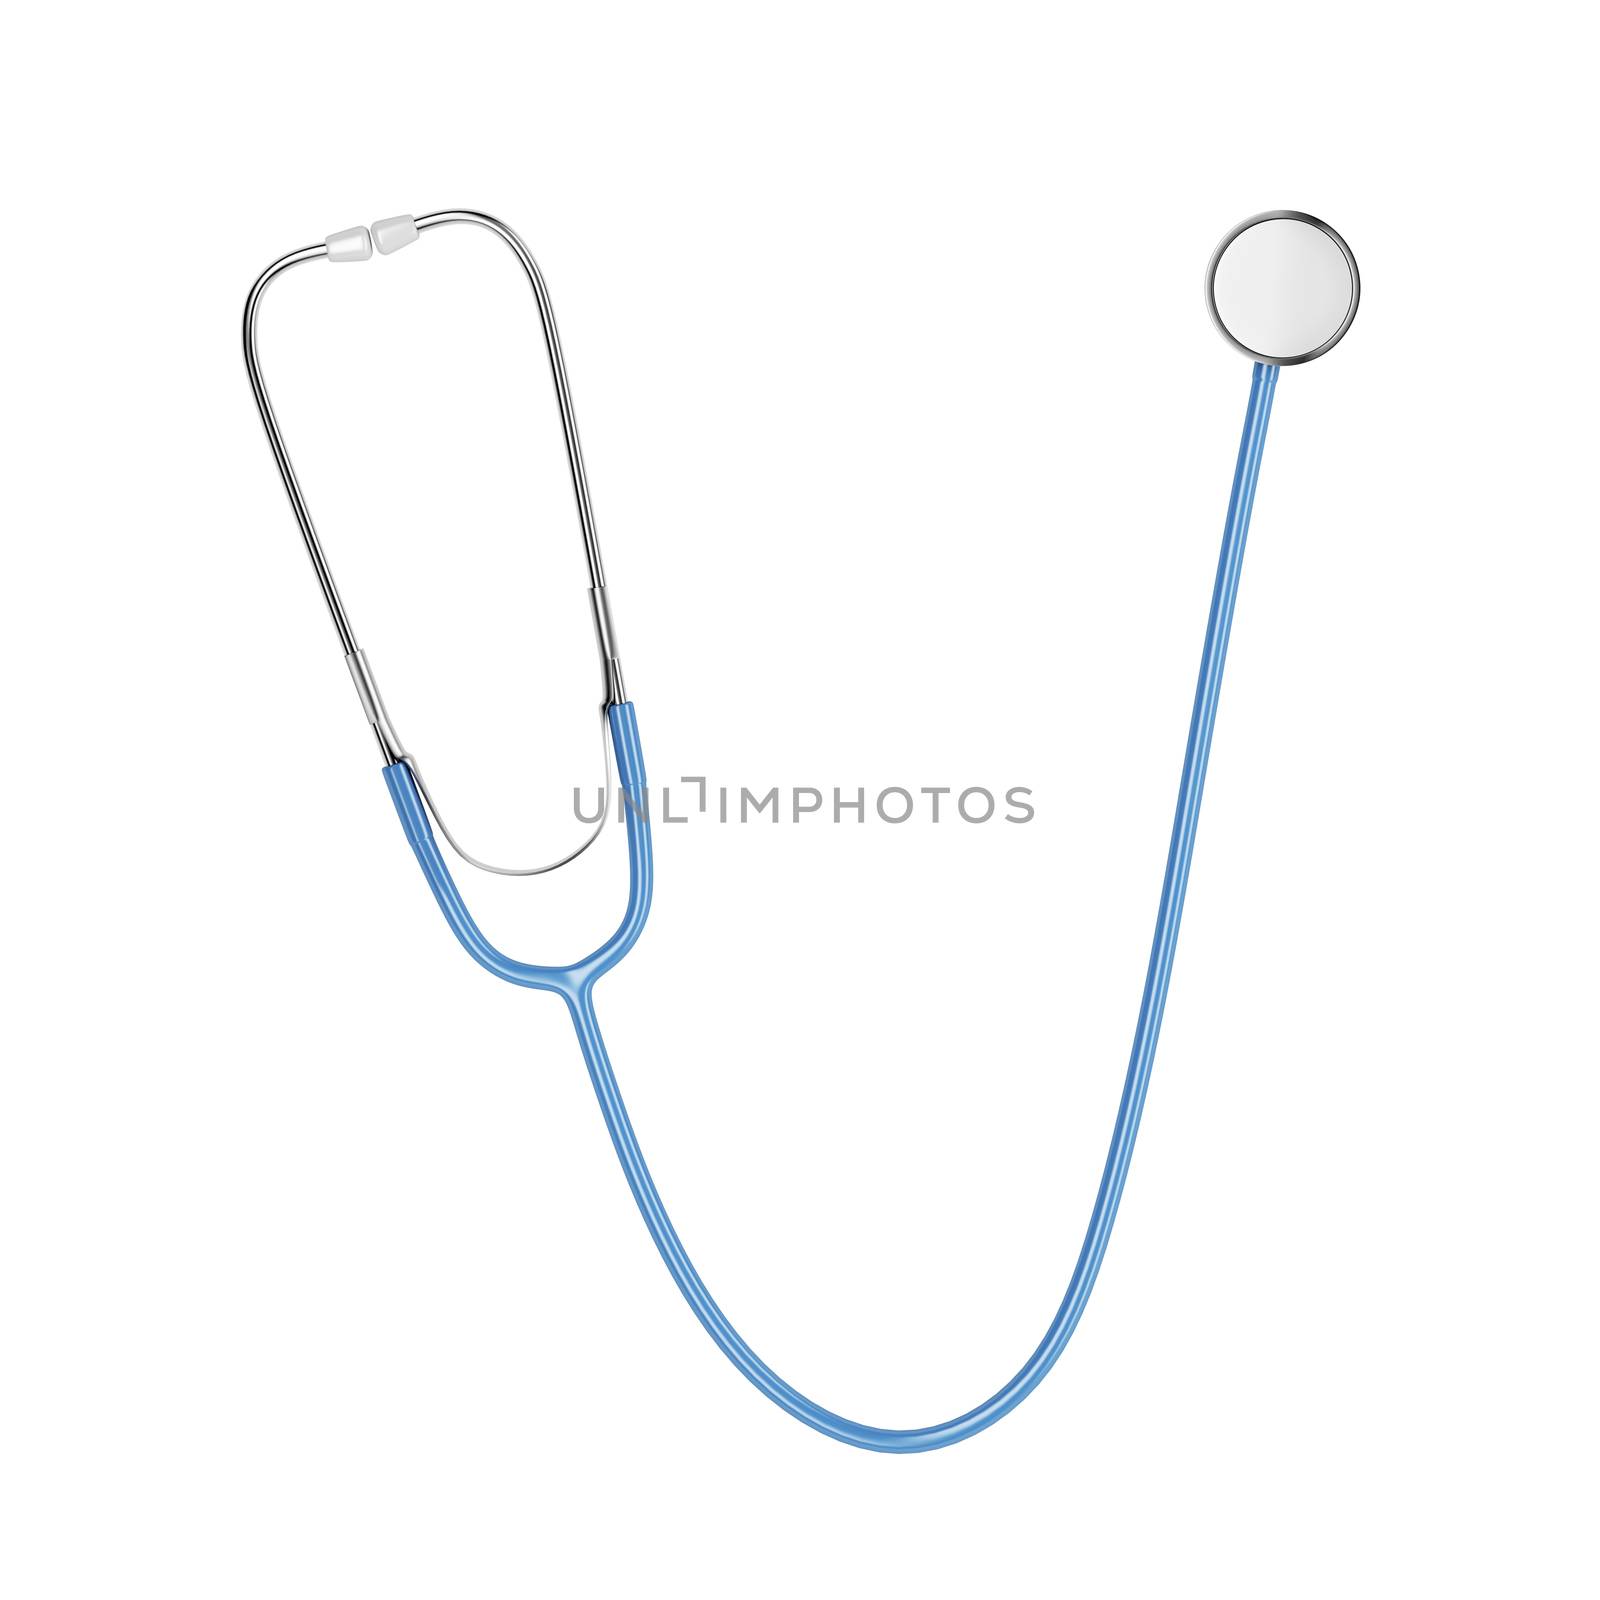 Stethoscope isolated on white background
 by magraphics